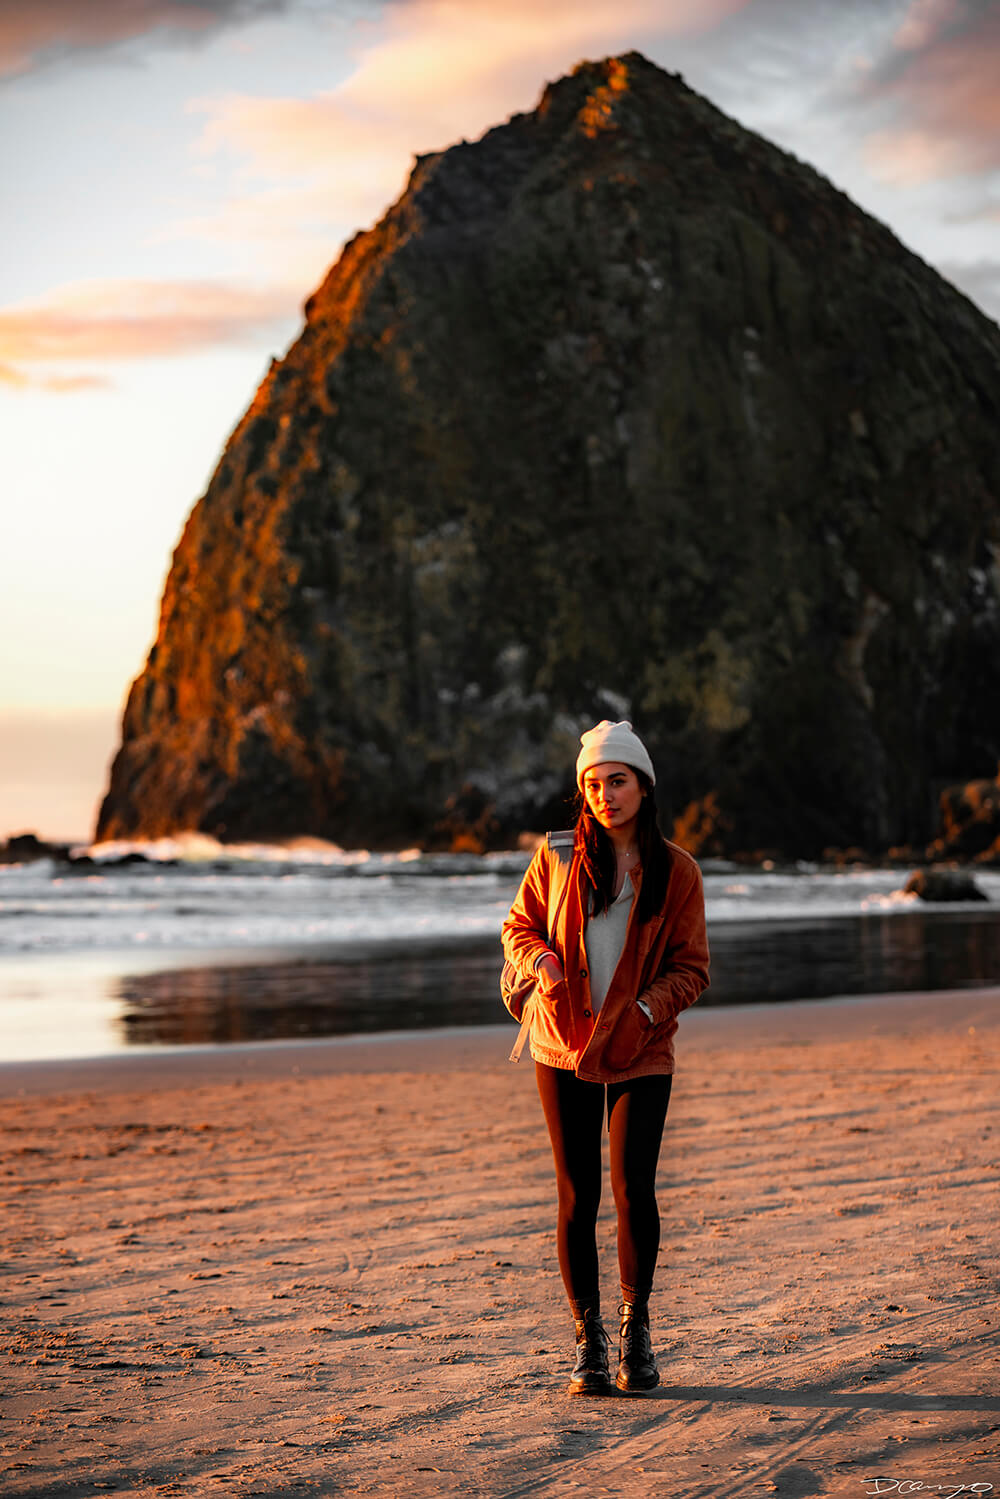 Portrait photography from Mt Hood, Mirror Lake, Lost Lake, Smith Rock State Park, Painted Hills, Blue Pool, and Cannon Beach, Oregon in Fall of 2020.